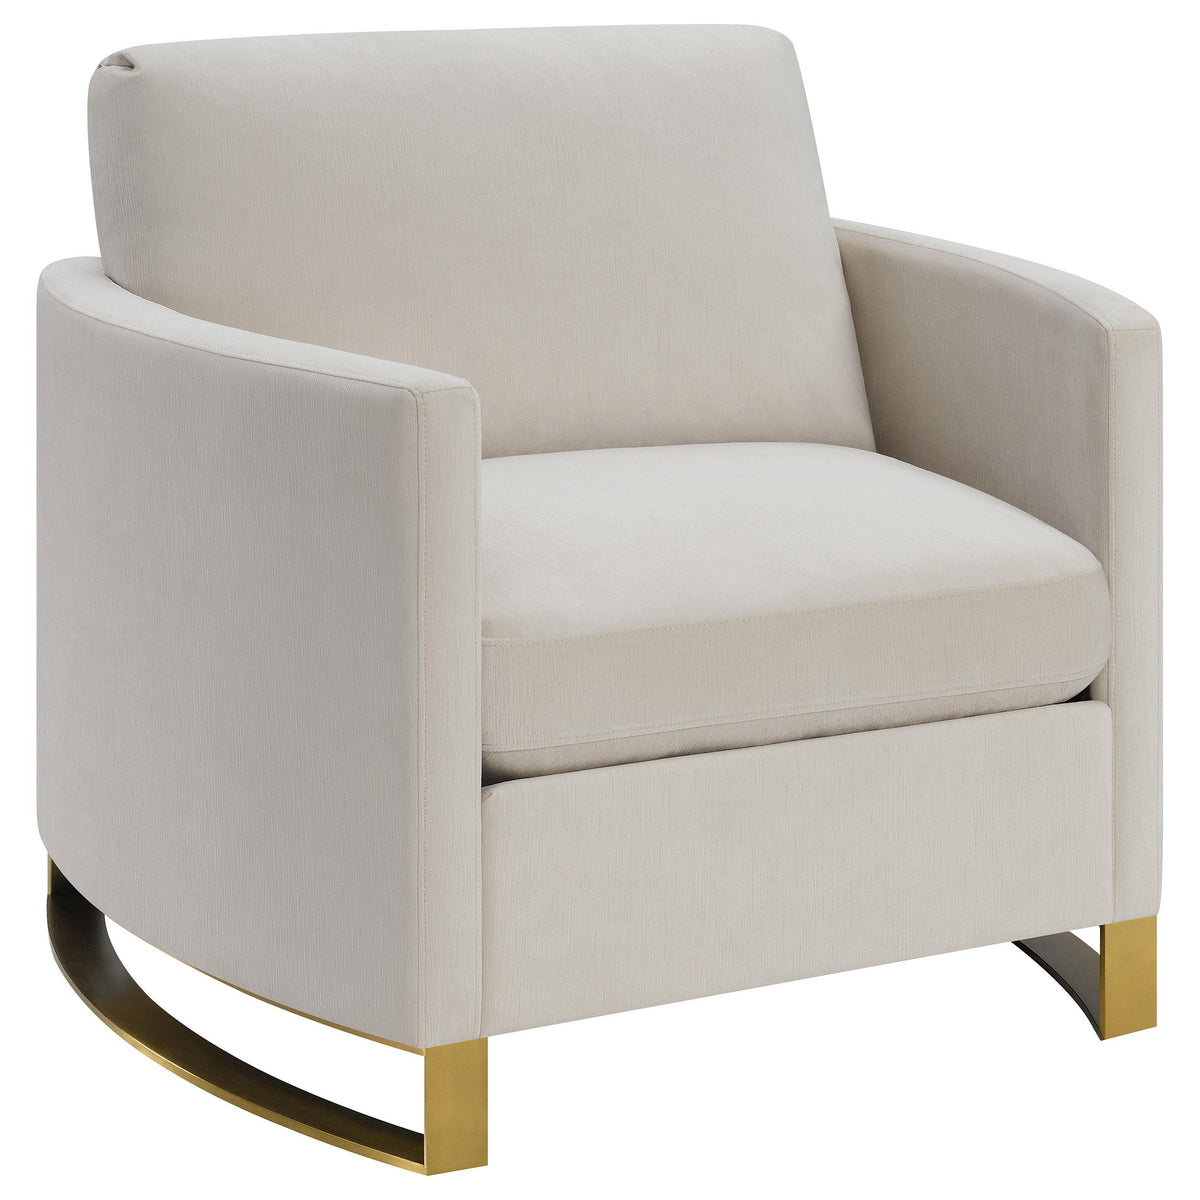 Corliss Upholstered Arched Arms Chair Beige Corliss Upholstered Arched Arms Chair Beige Half Price Furniture